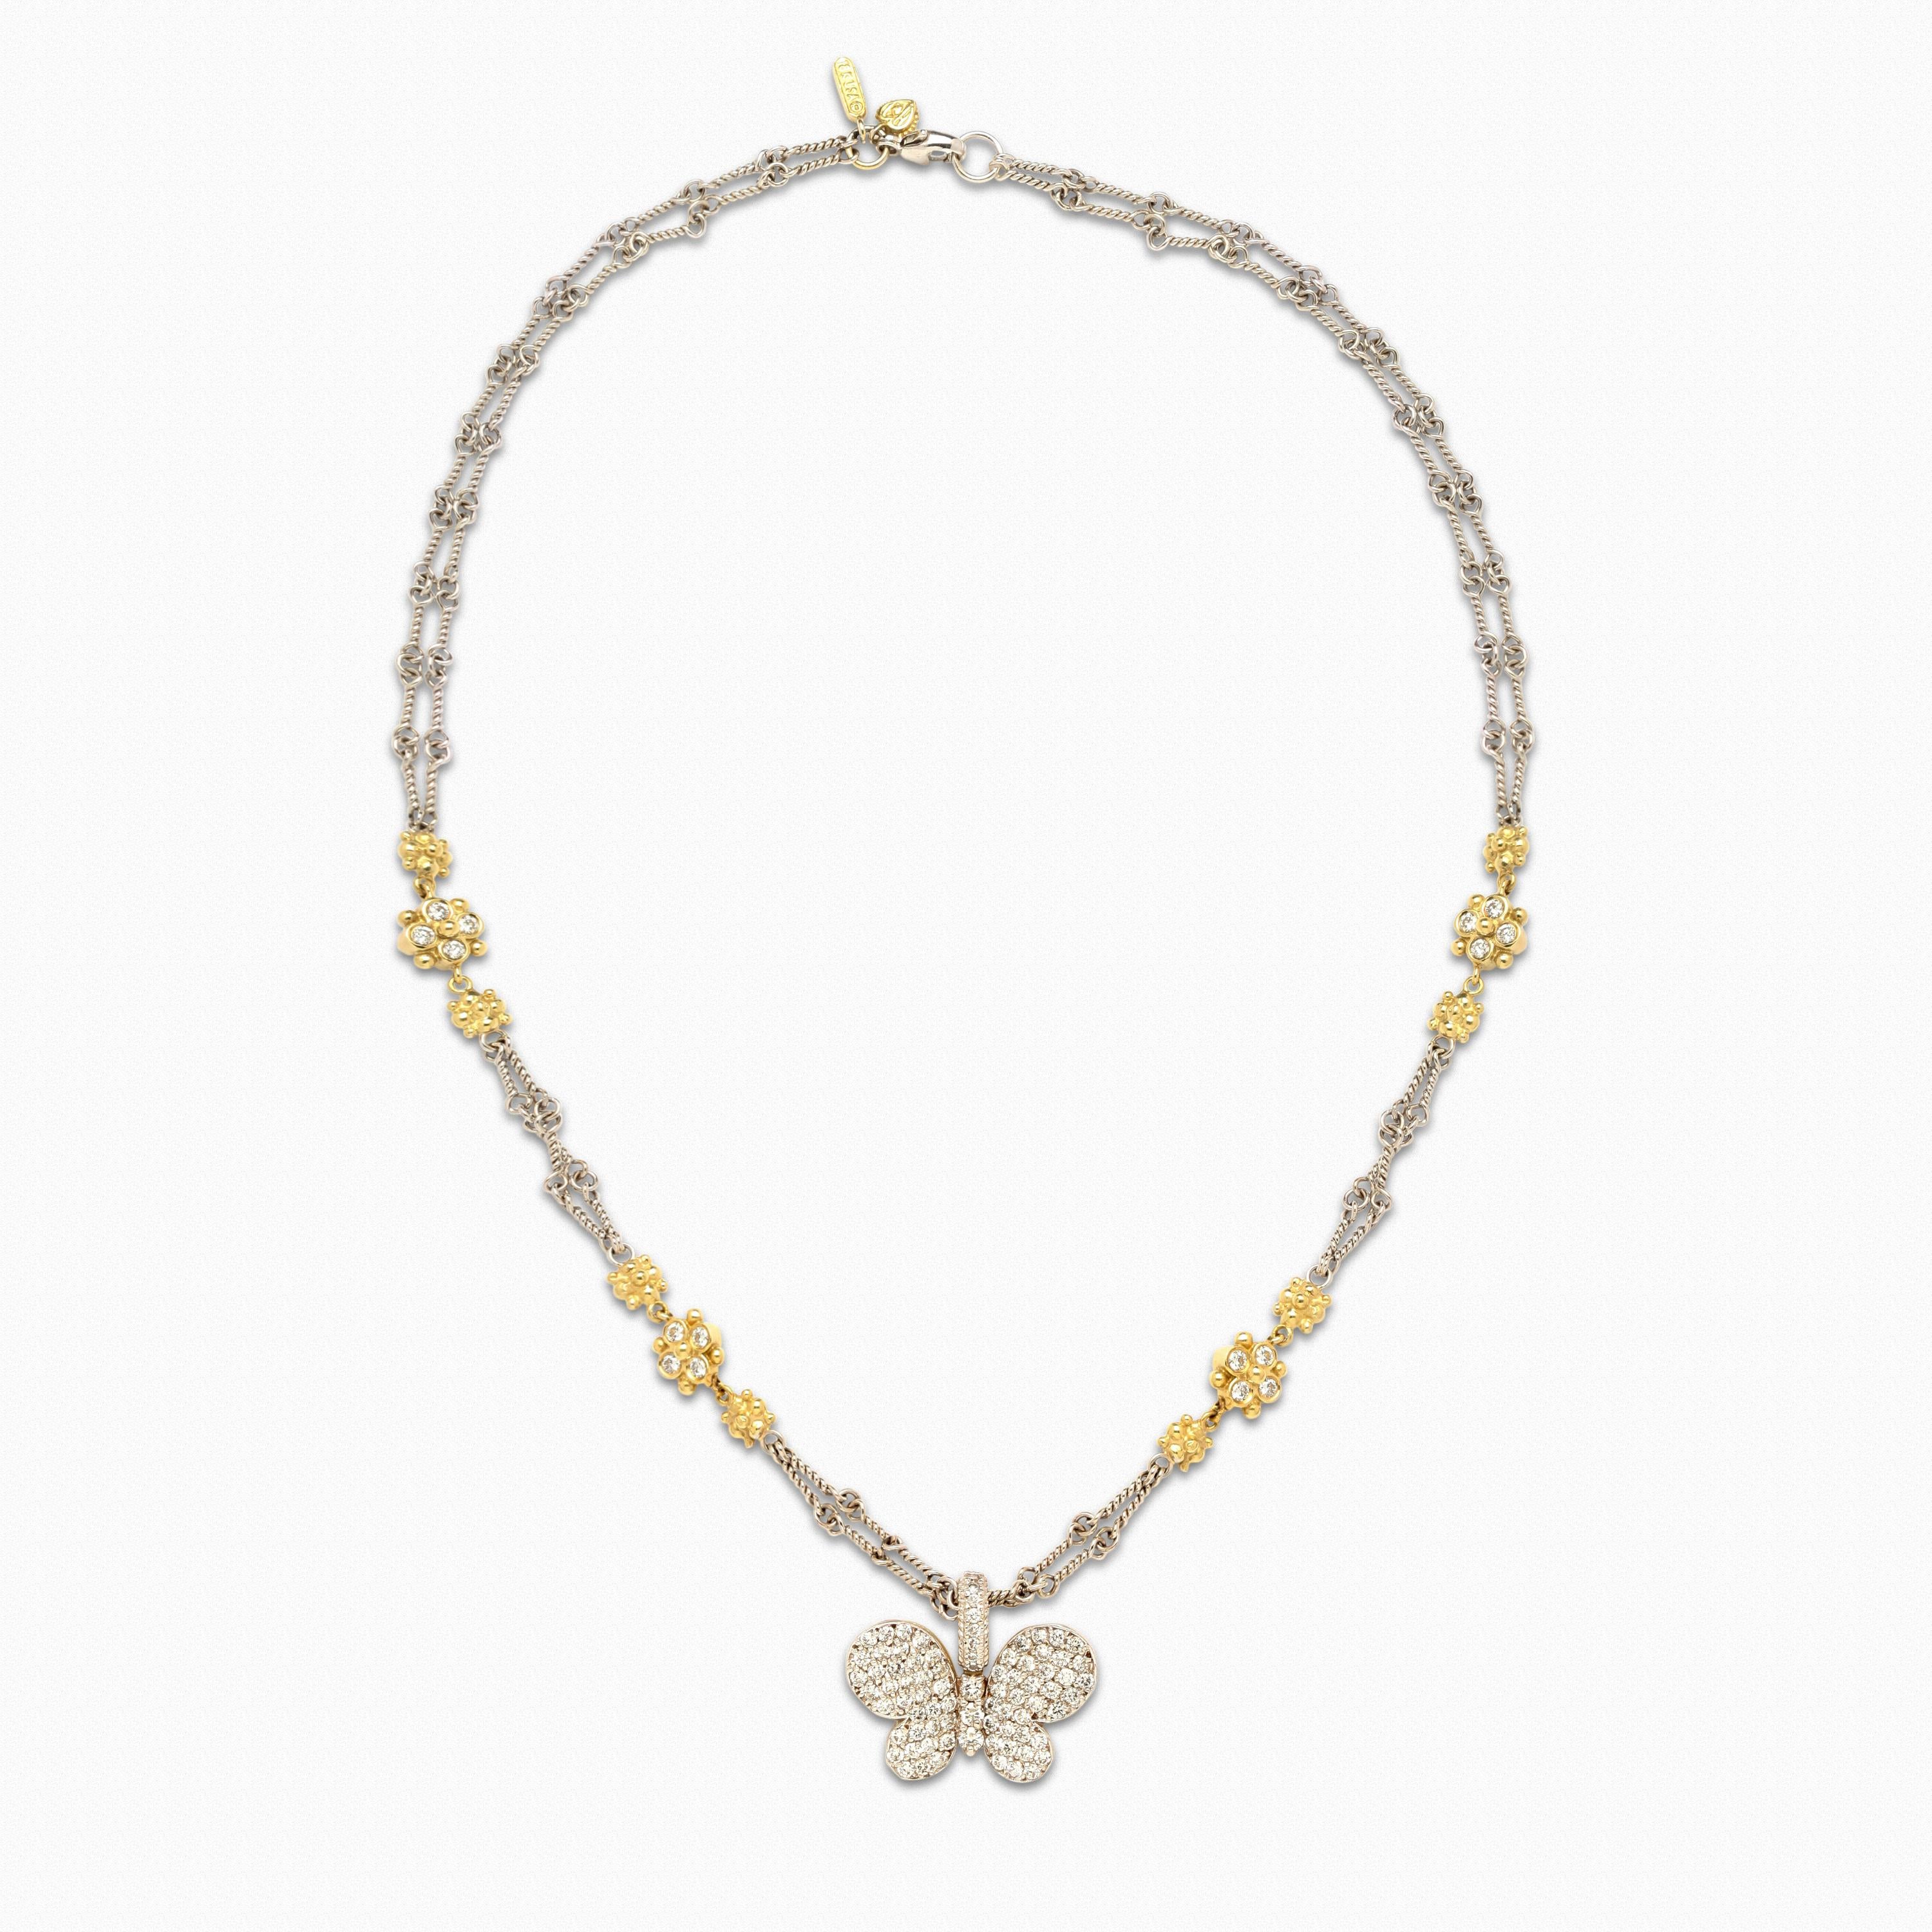 18K Yellow and White Two-Tone Gold Chain Necklace with Diamond Butterfly Enhancer Pendant

Butterfly can detach and chain can be worn on its own. Double-link chain is done in two-tone gold and the diamond bezels are double sided. Diamonds are set on